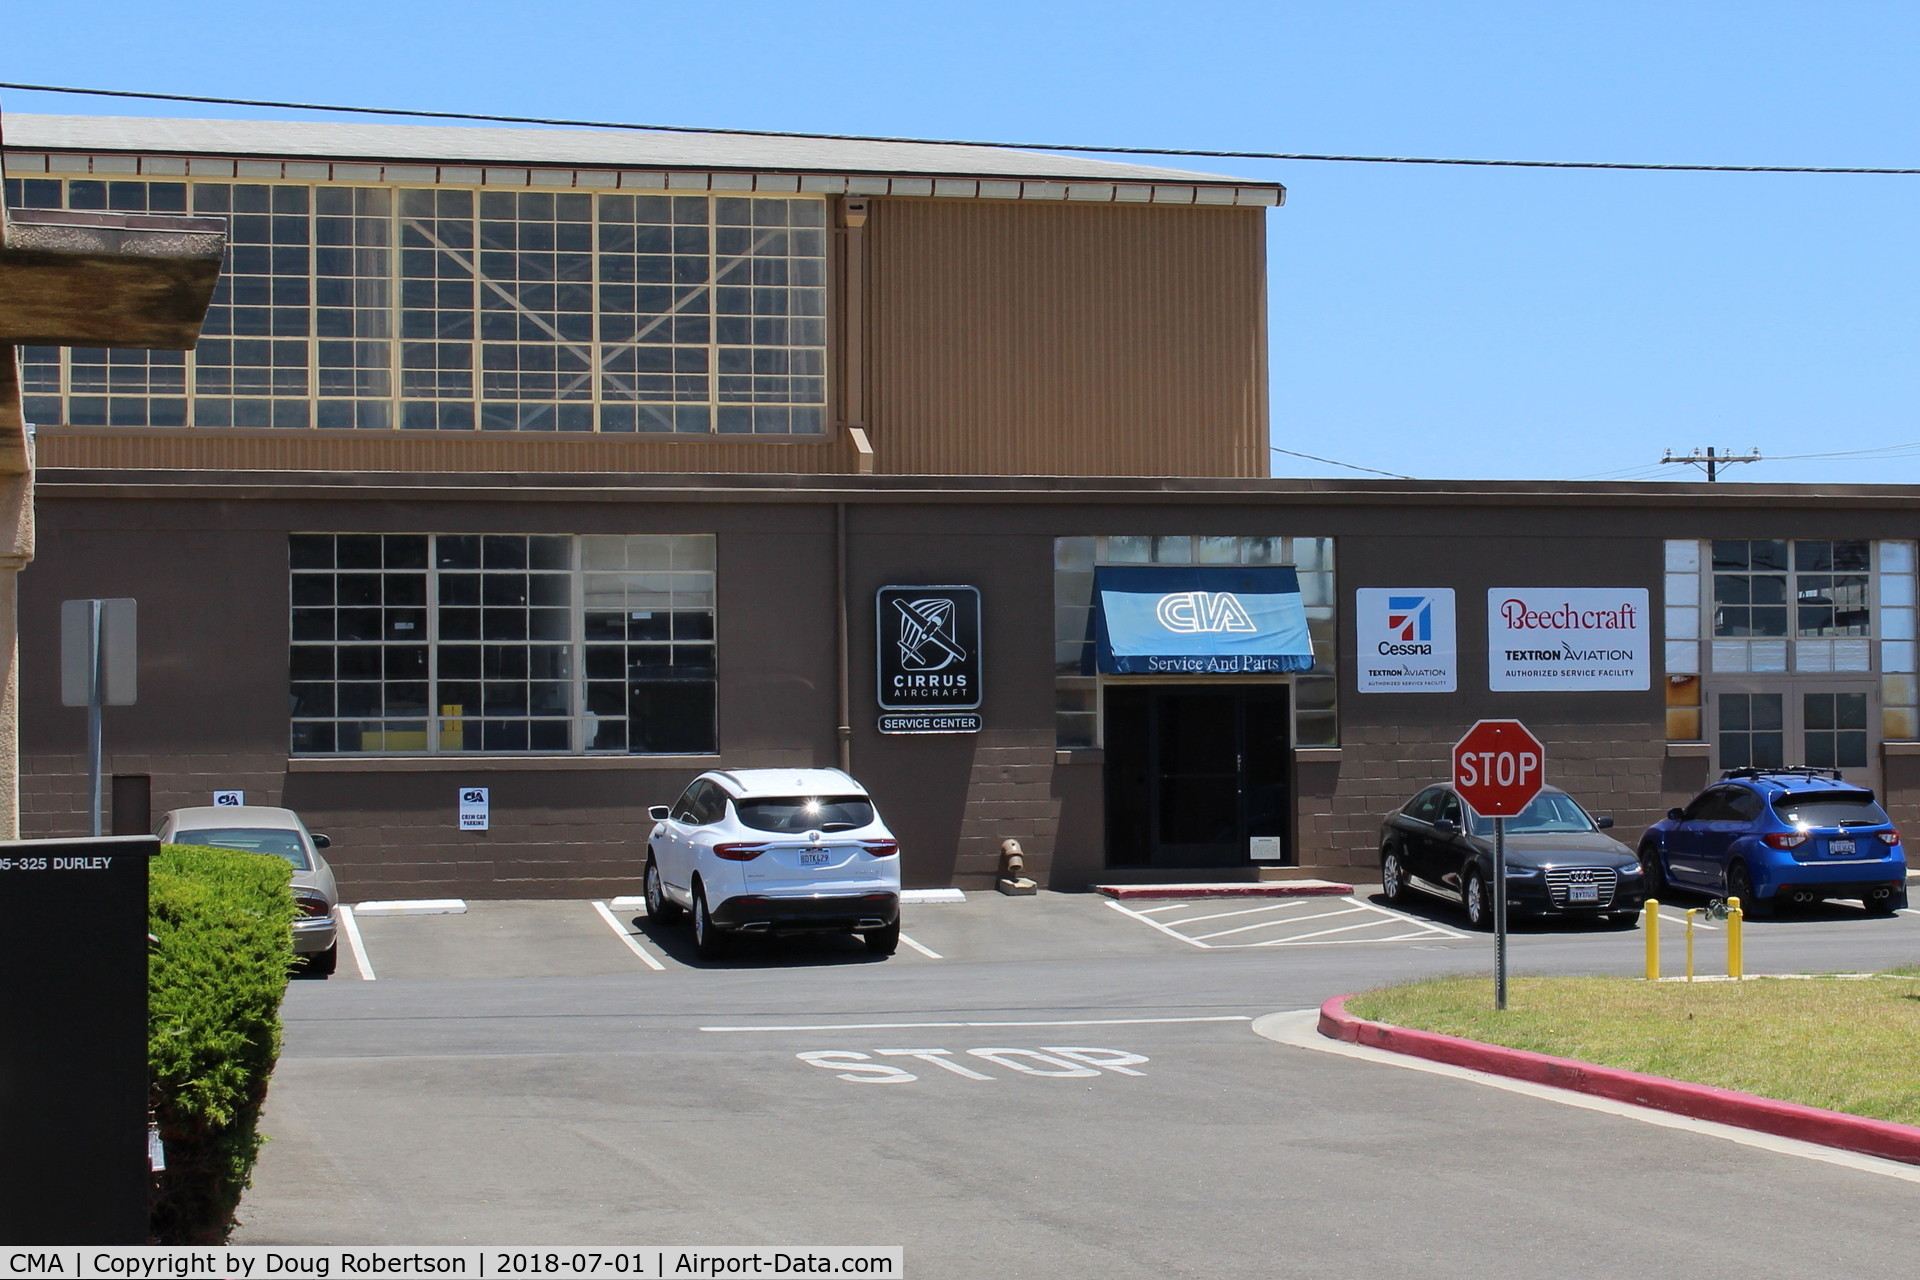 Camarillo Airport (CMA) - Channel Islands Aviation Cessna Dealer Maintenance Hanger since 1976 with other Makes officially serviced. (Textron owns both Cessna and Beech).